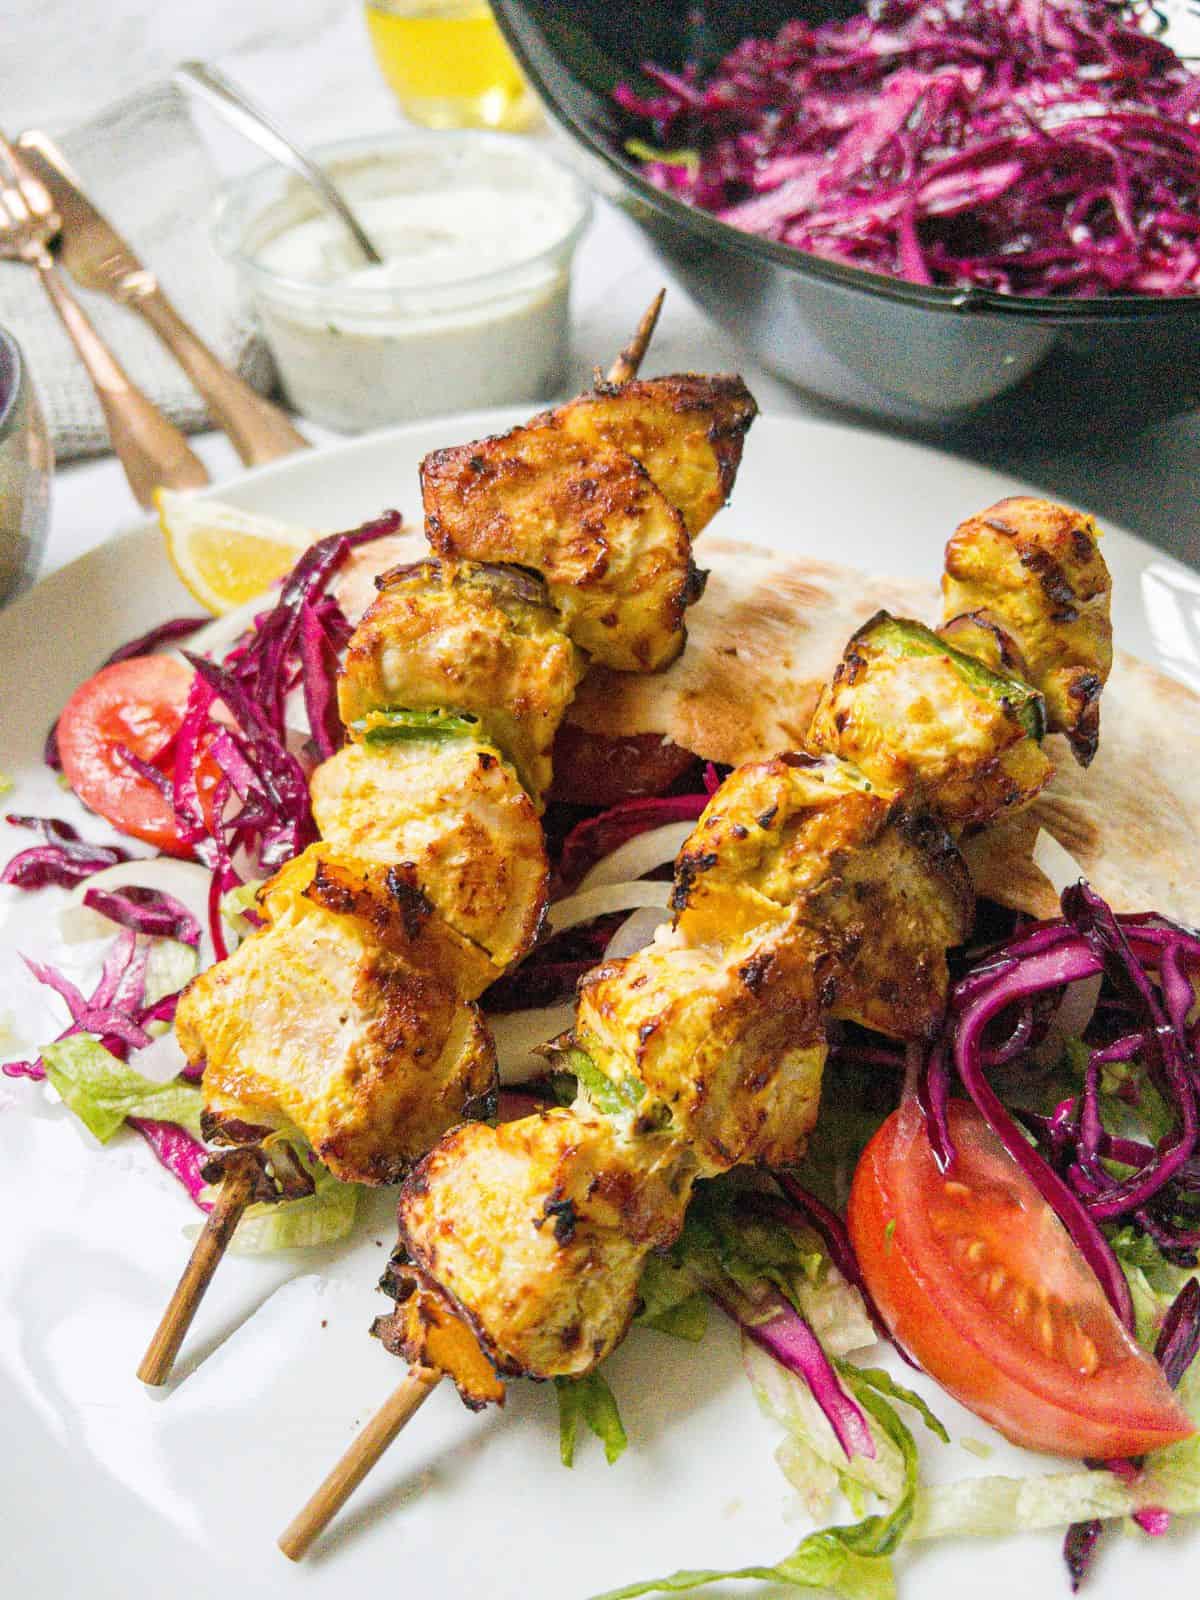 Two chicken shish kebabs on sticks laying on top of salad and pitta bread on a white plate. With a bowl of red cabbage & pot of garlic sauce in the background.